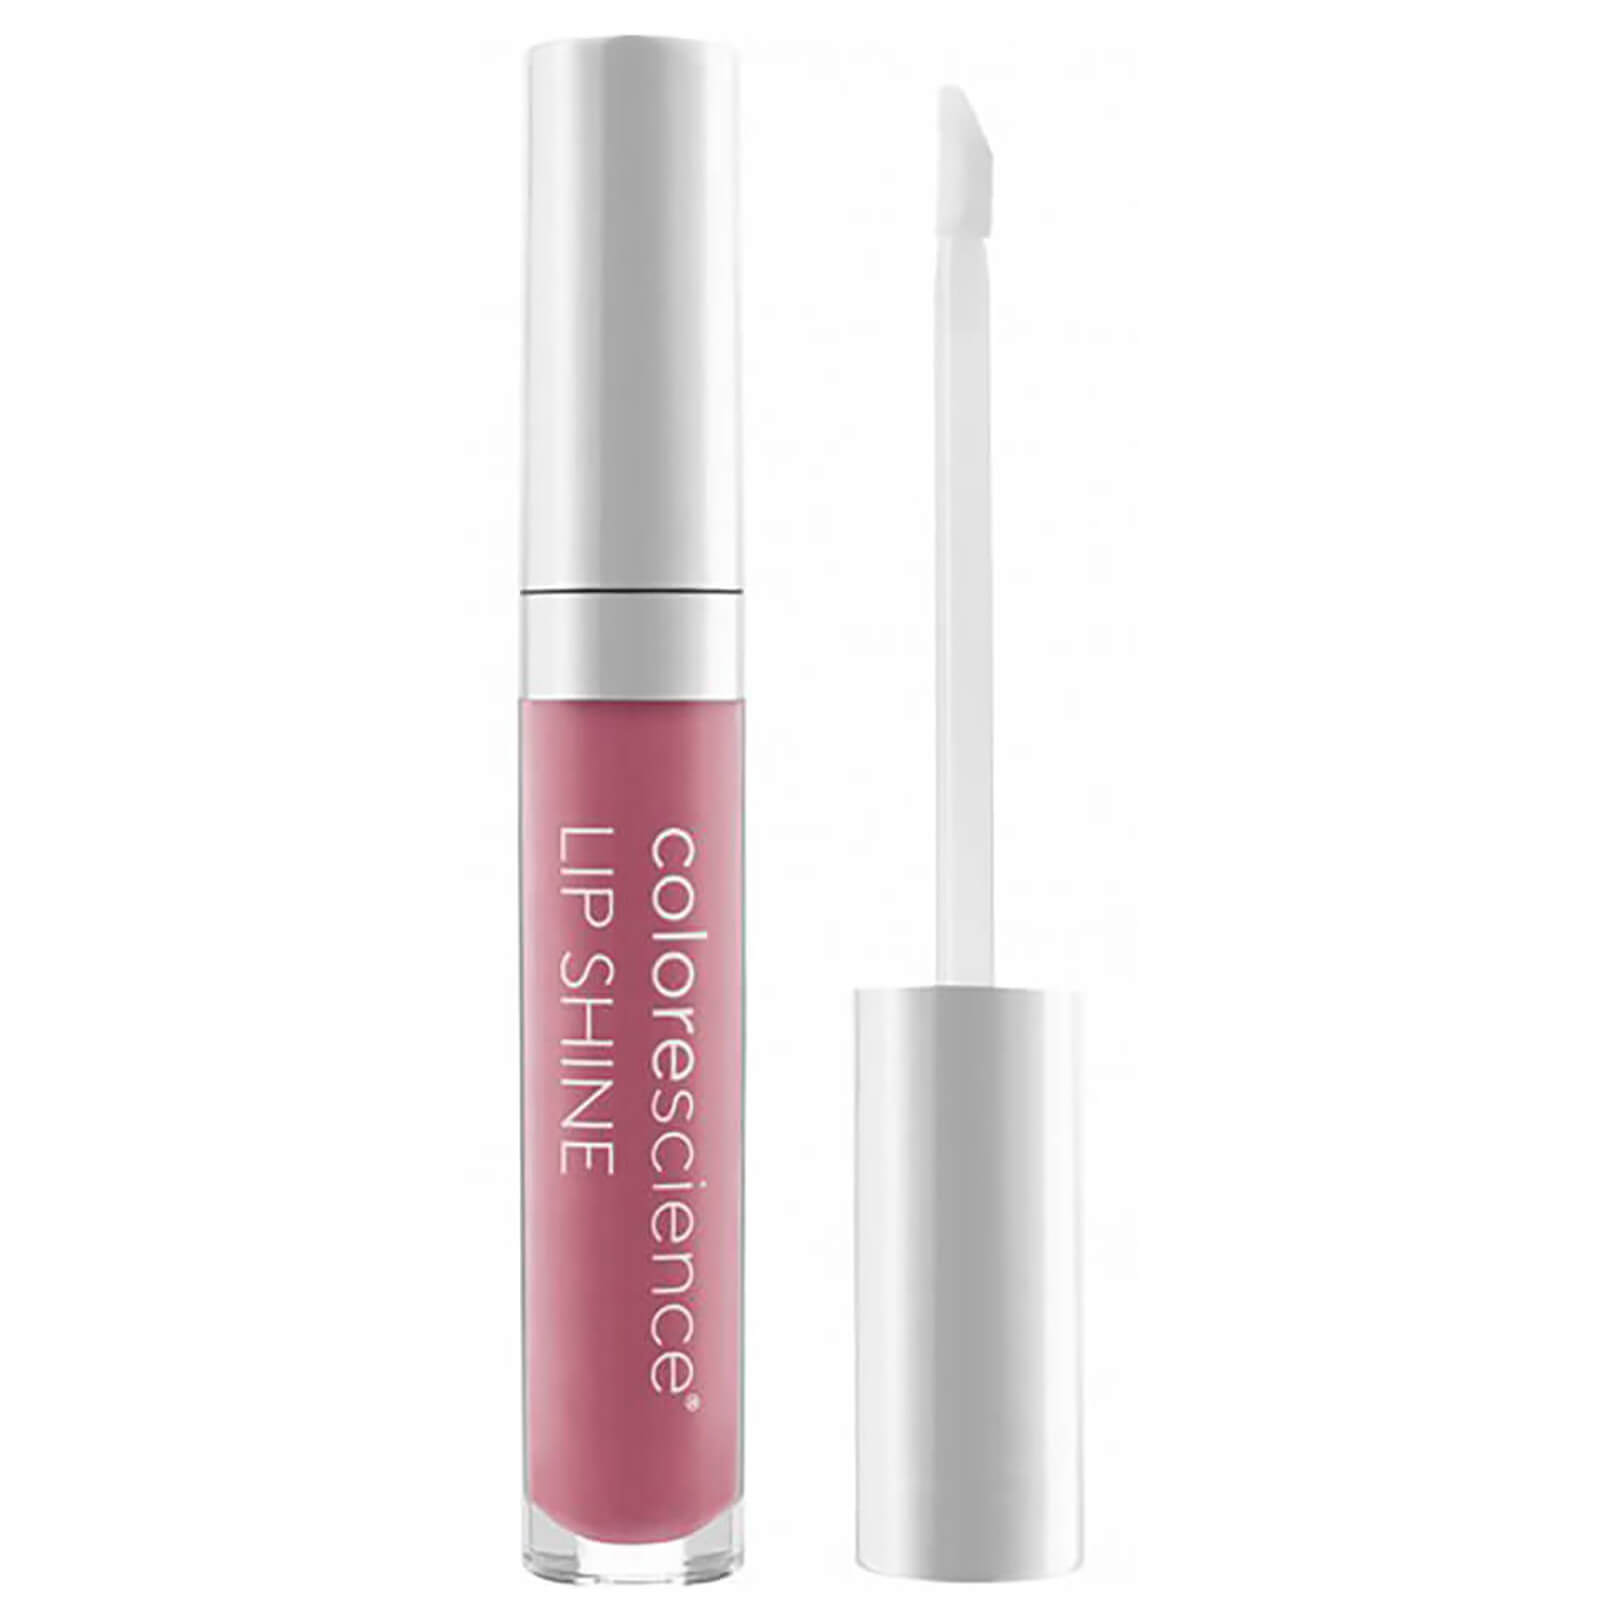 Colorescience Sunforgettable® Lip Shine Spf 35 (0.12 Fl Oz) - Various Shades In Pink